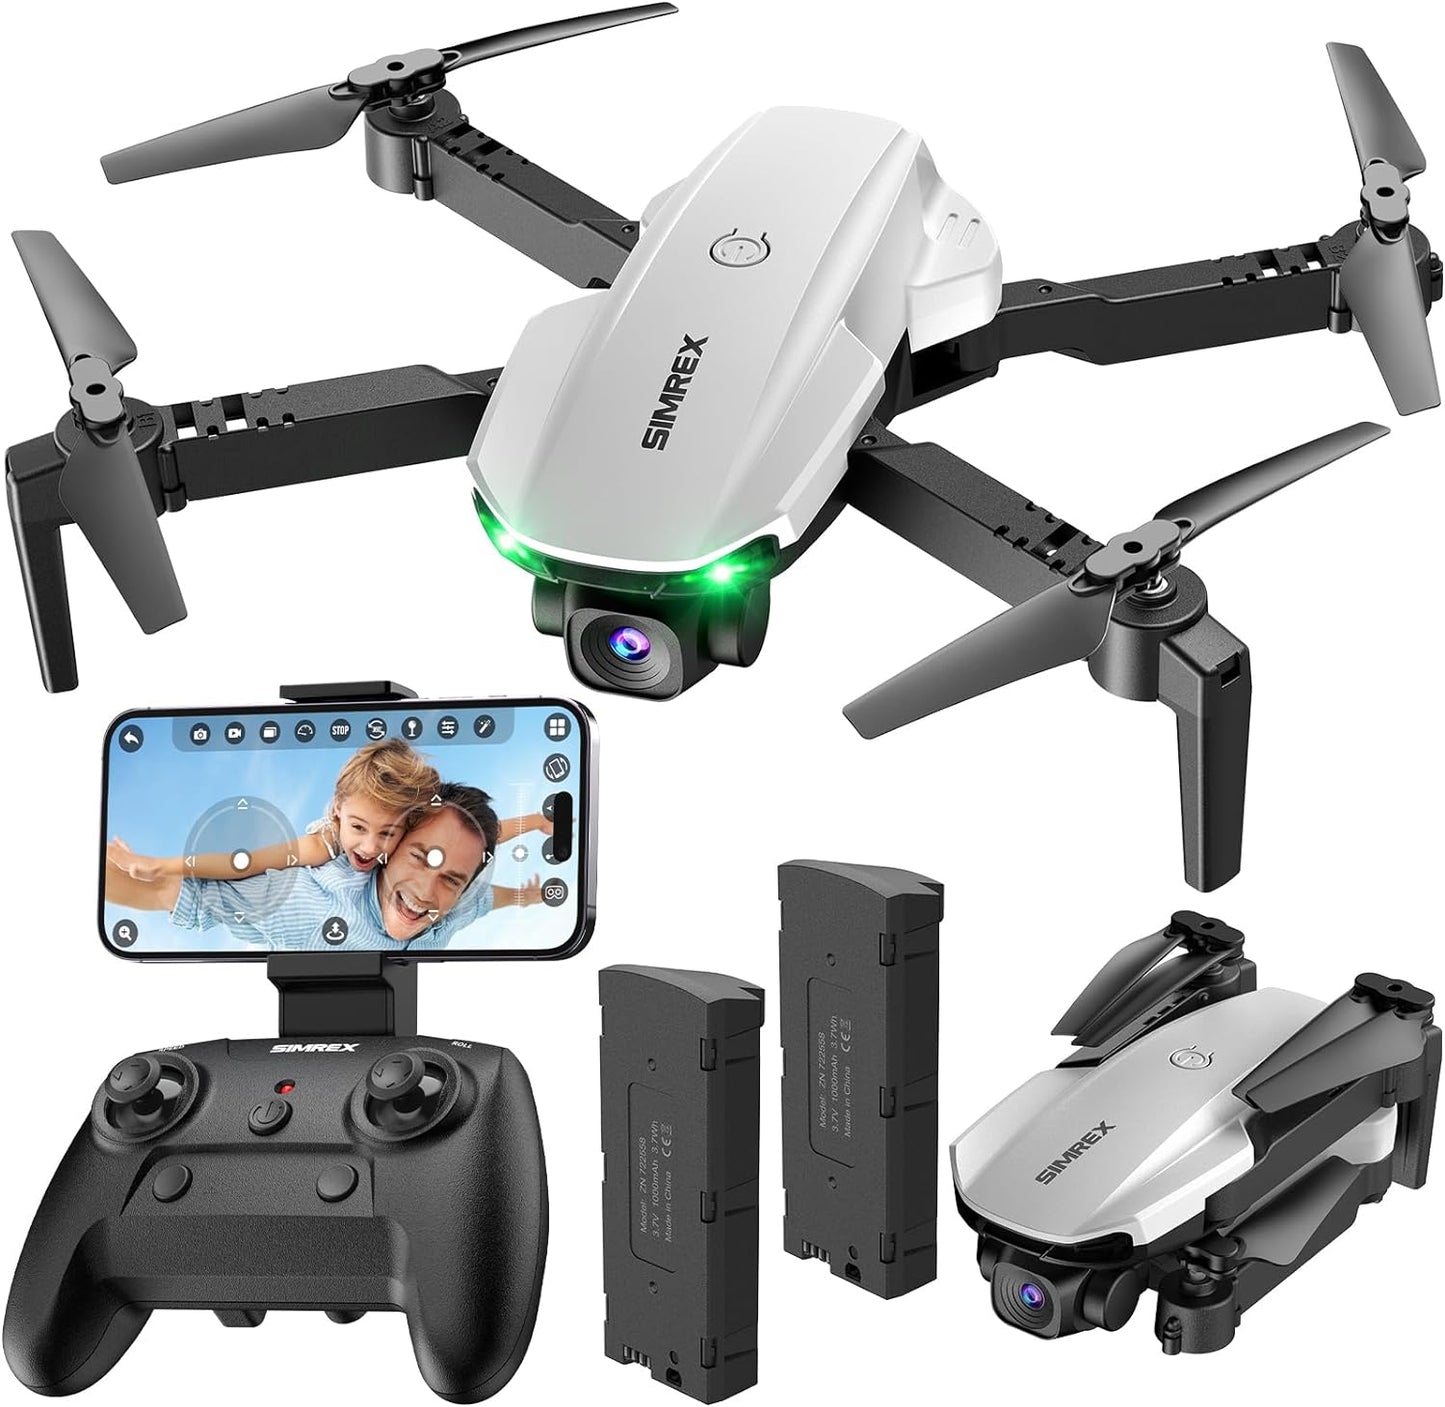 SIMREX X800 Drone with Camera for Adults Kids, 1080P FPV Foldable Quadcopter with 90° Adjustable Lens, RGB Lights, 360° Flips, One Key Take Off/Landing, Altitude Hold, 2 Batteries